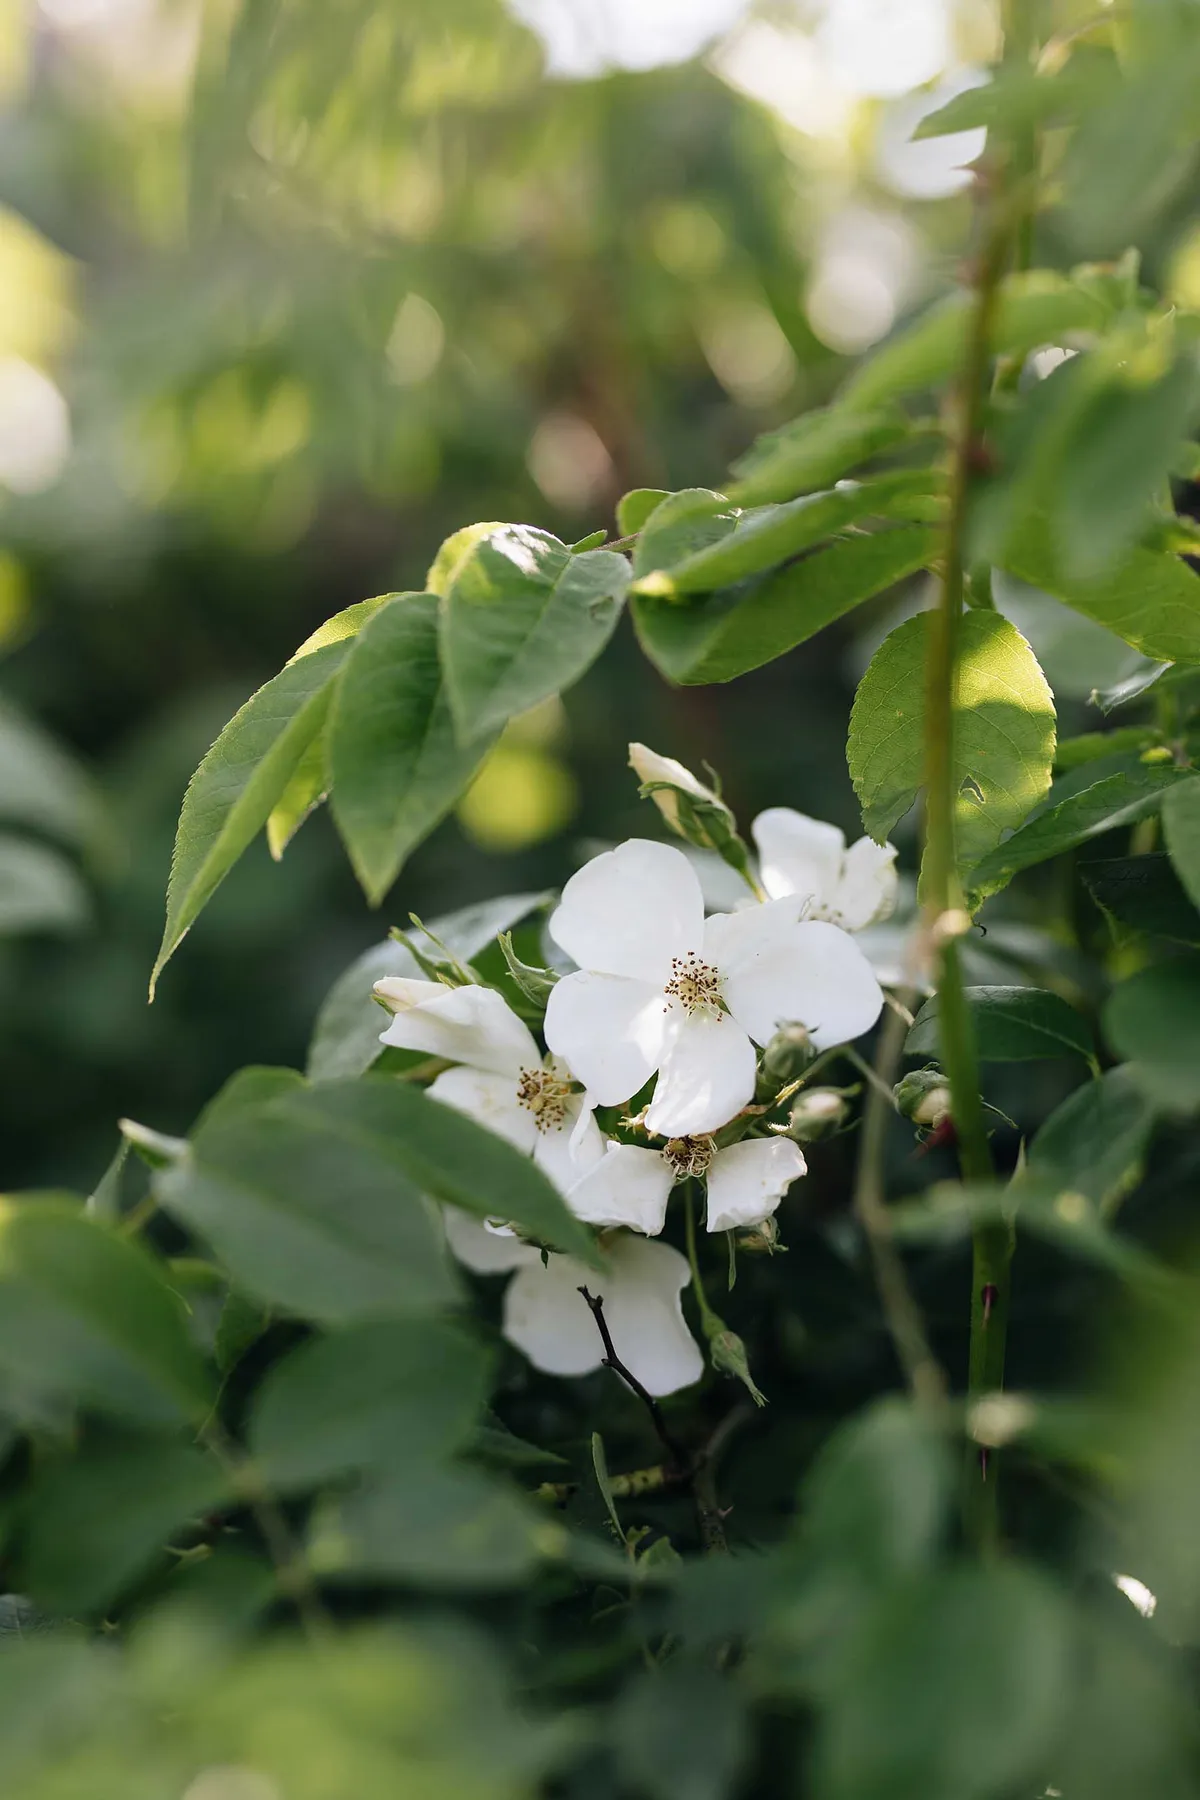 Rosa moschata (musk rose), is a medium-sized rambling rose with lustrous sprays of creamy-white, single flowers that flower late and then repeat, and a strong, delicious musk fragrance.